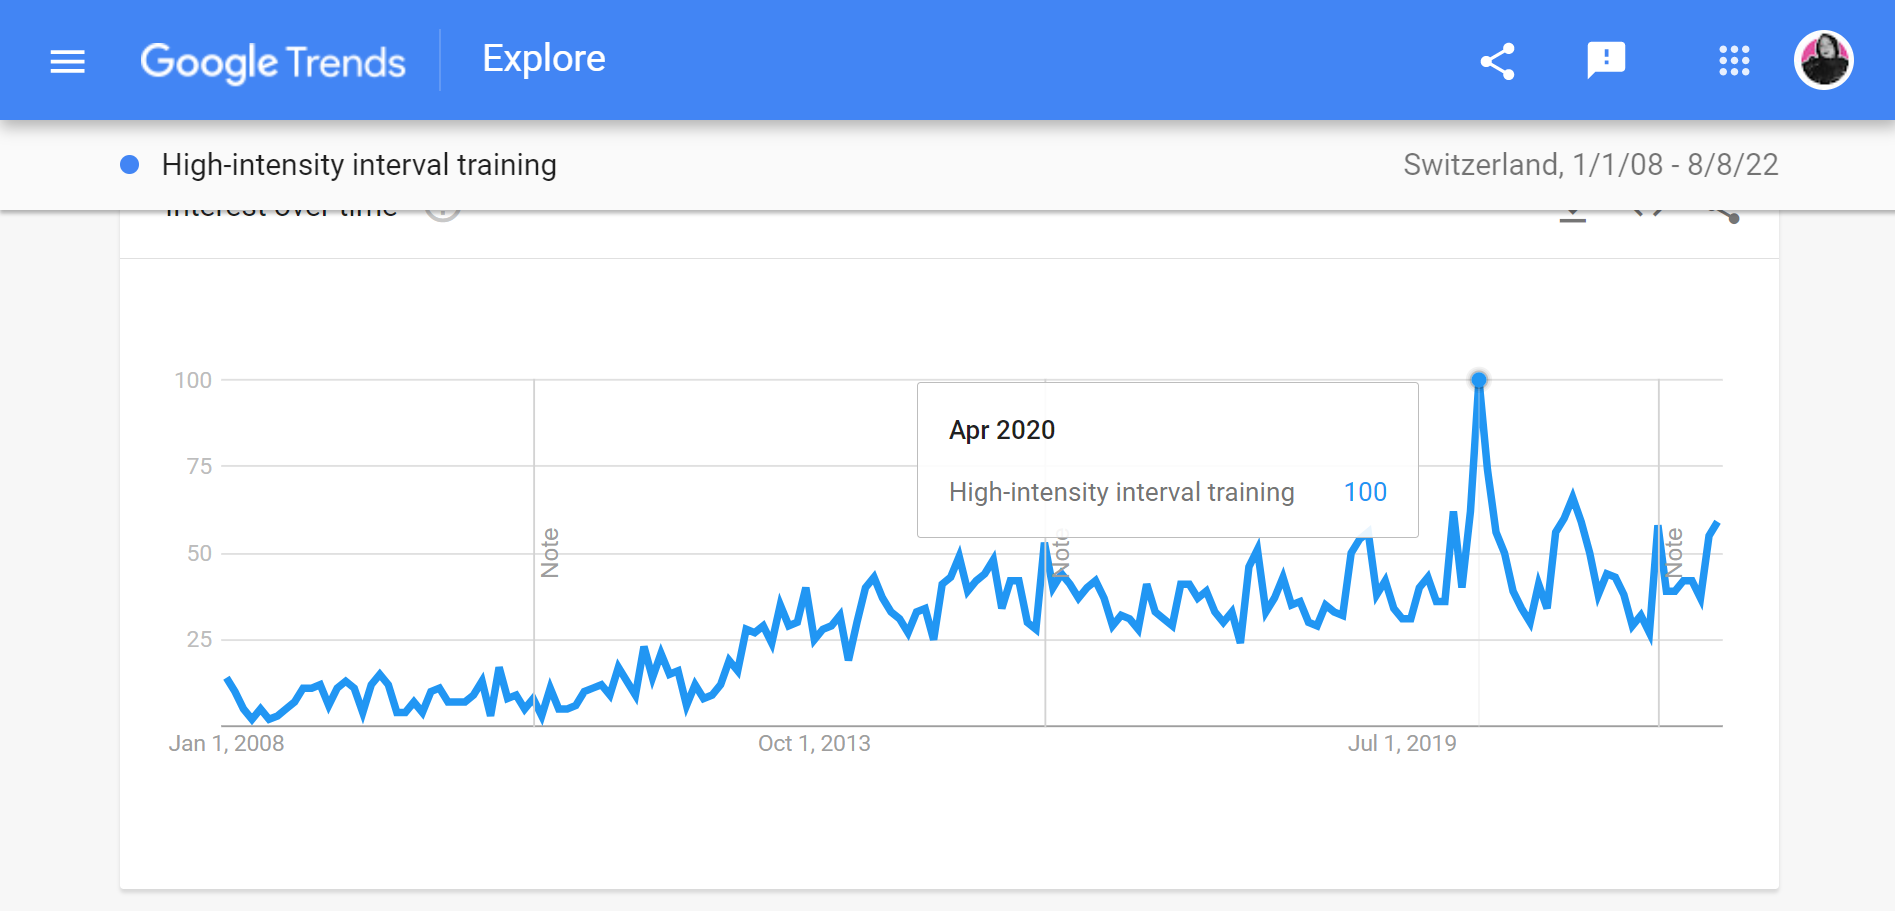 A Screenshot Of The Web Search Interest For Hiit Training Over The Years In Switzerland Ever Since 2008 Till August 8, 2022